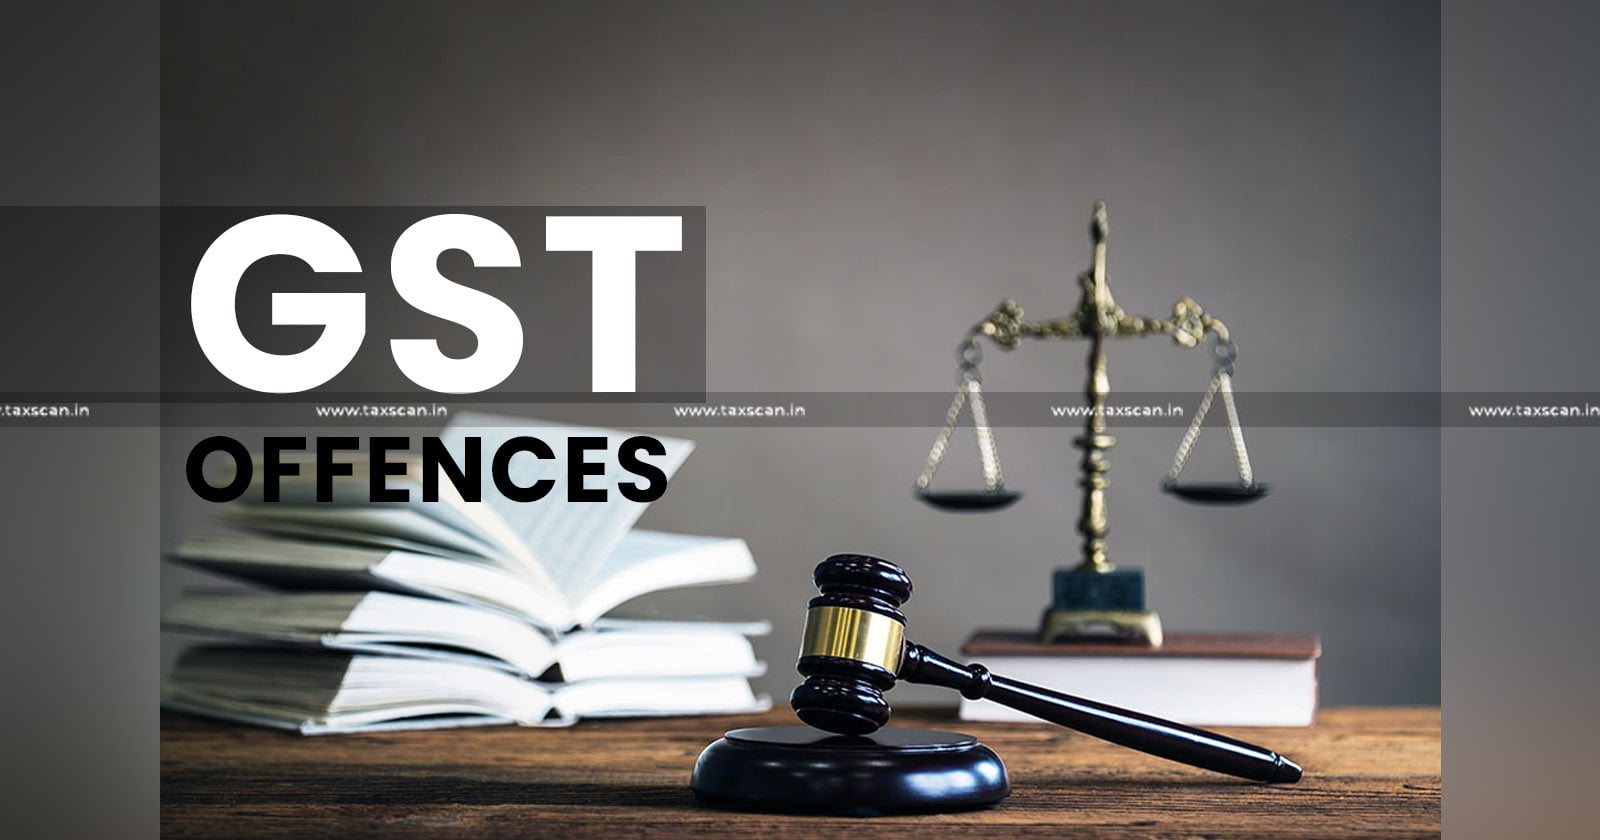 GST Offences - GS - offences - Statistics - Lok Sabha - Pankaj Chaudhary - Minister of State - Finance of India - Taxscan